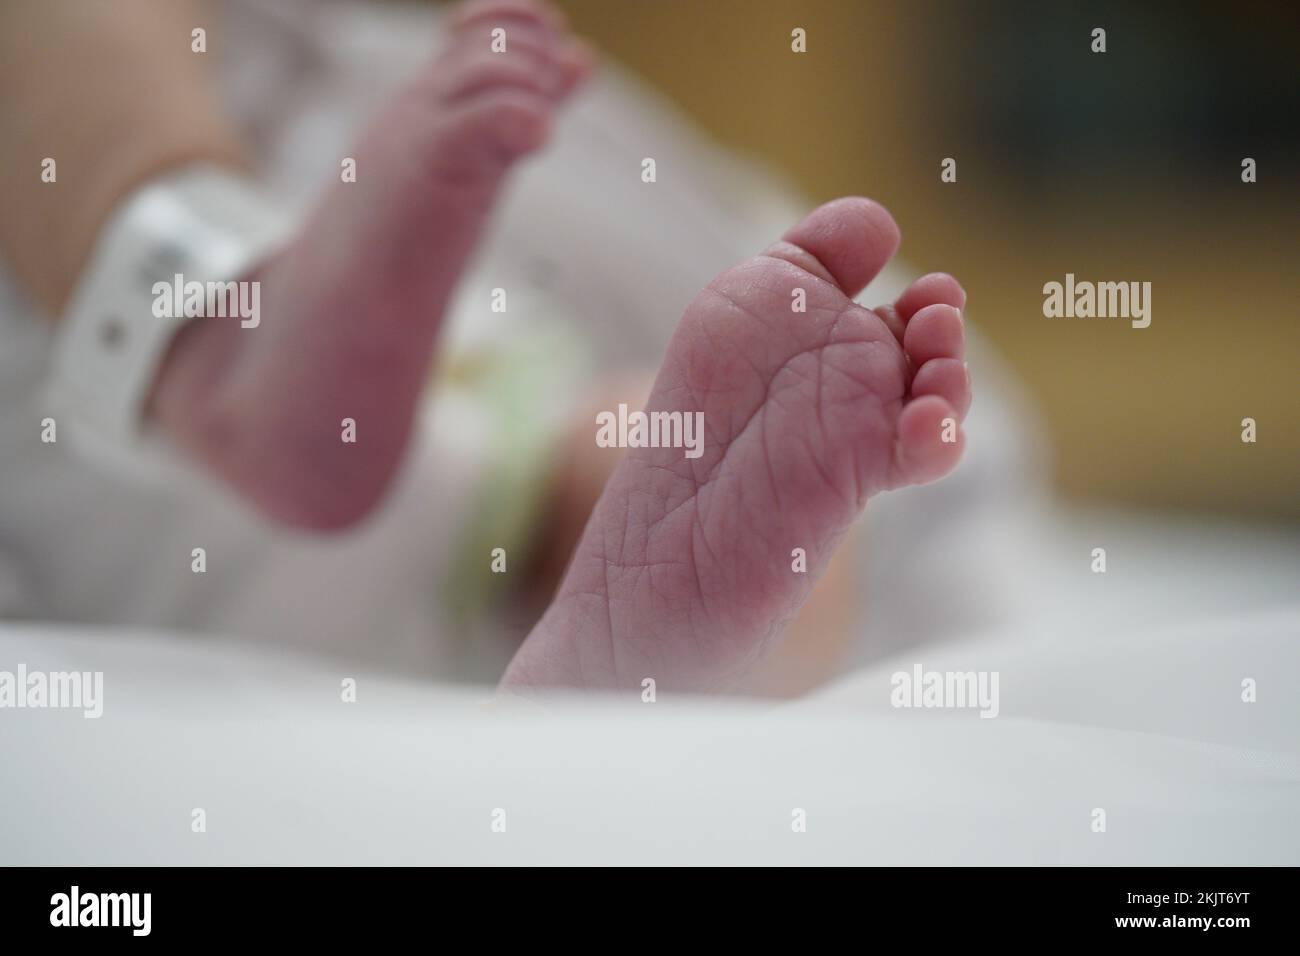 Newborn baby foot with identification bracelet in the hospital. Stock Photo